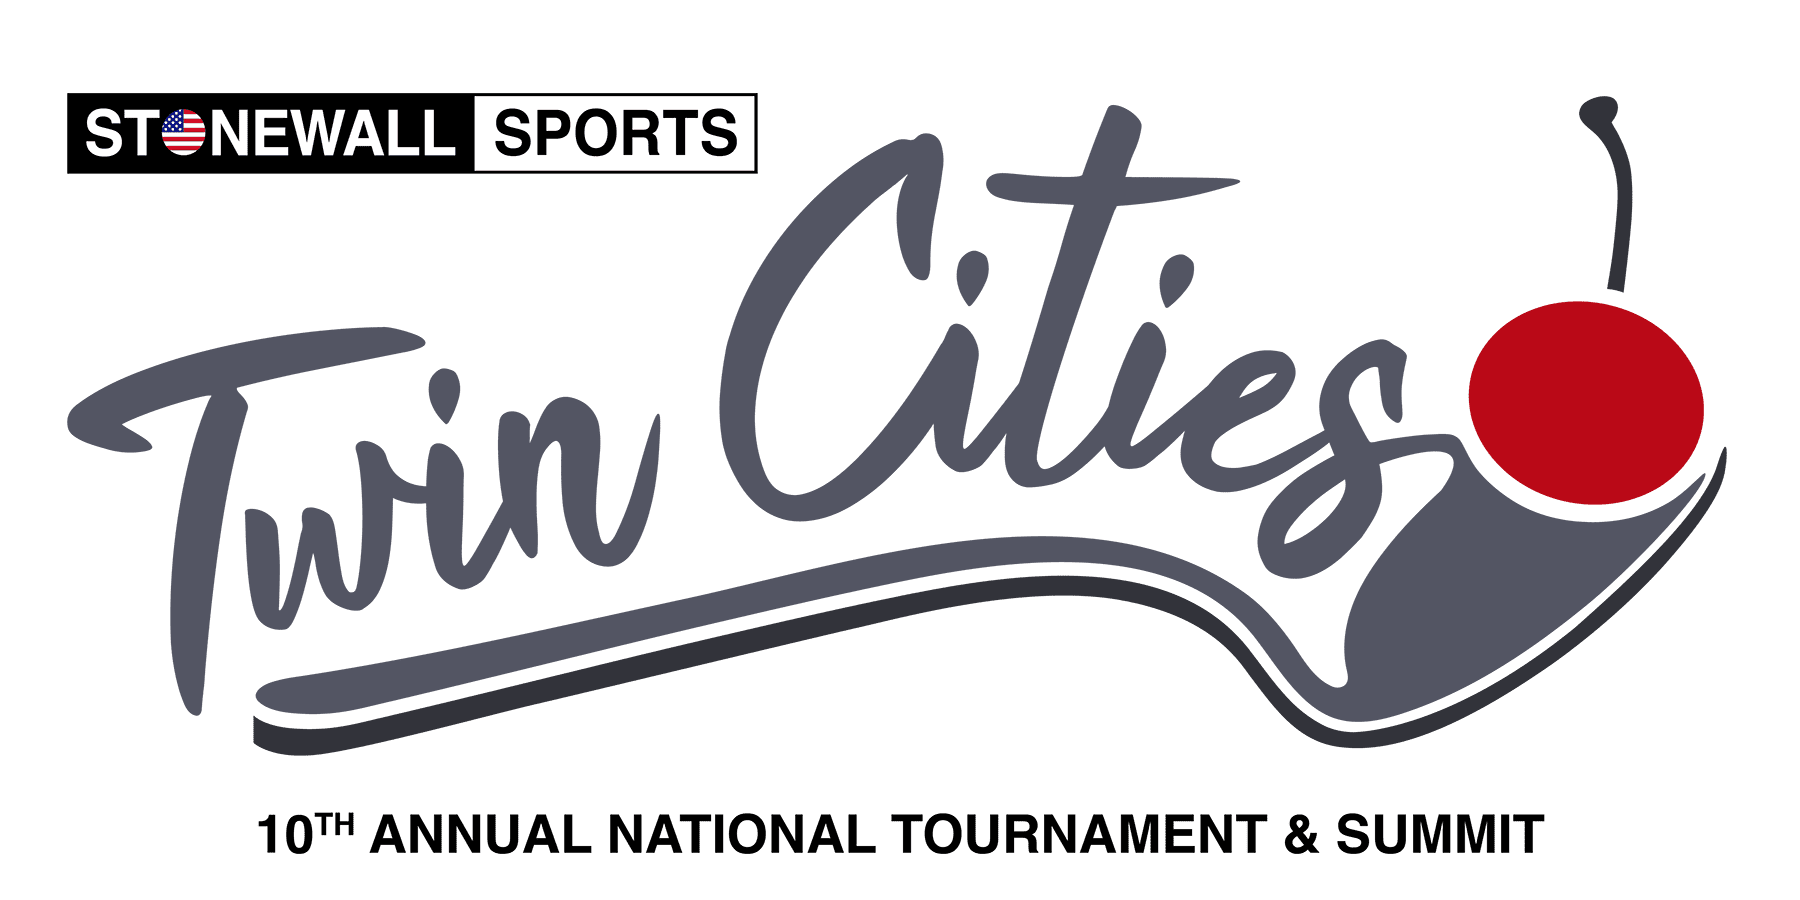 Stonewall Sports 10th Annual National Tournament & Summit at the Twin Cities, Minnesota